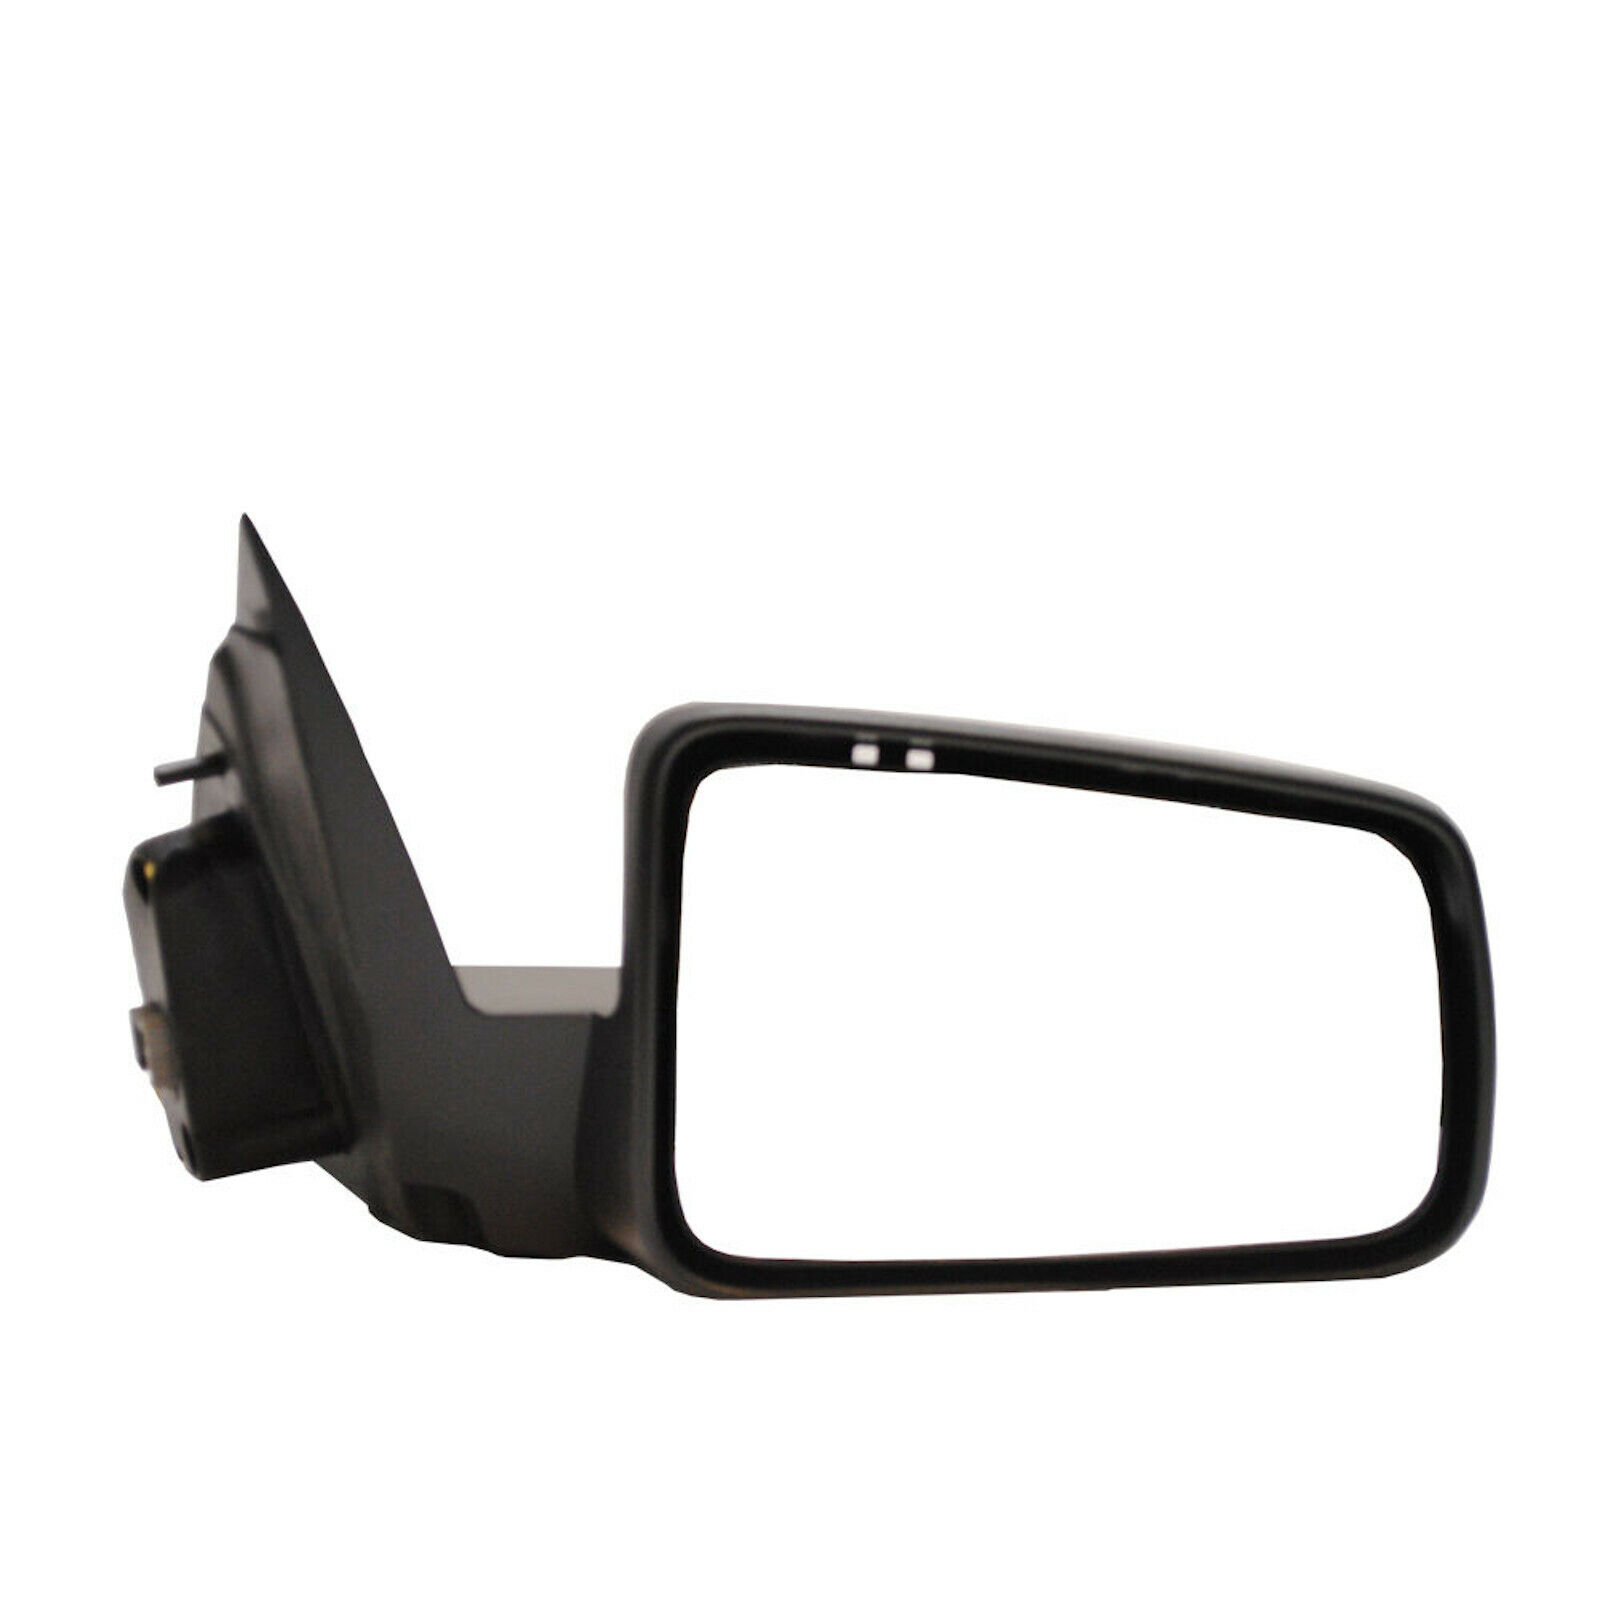 NEW OEM 2008-2011 Ford Focus Heated Power Rear View Mirror RIGHT, Passenger\'s